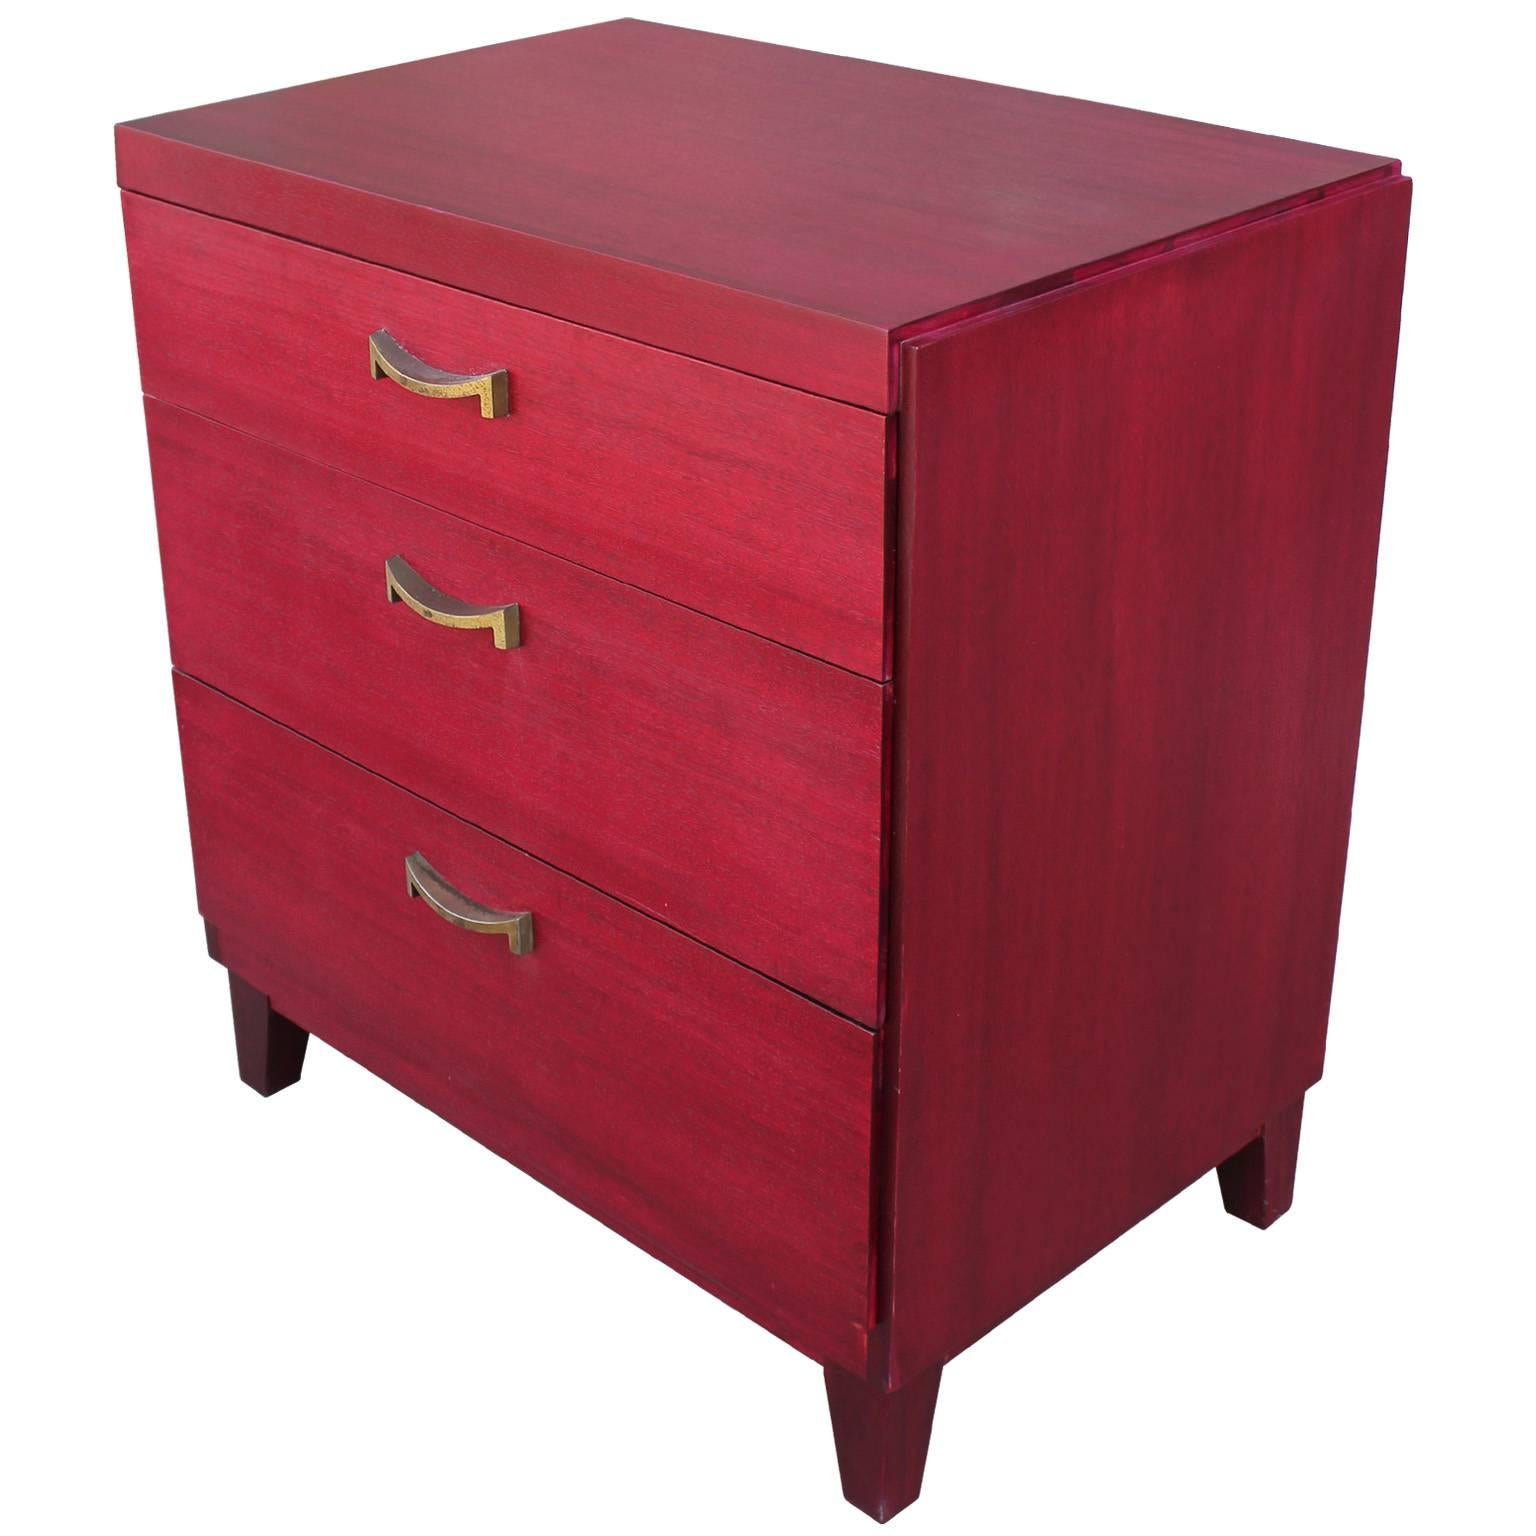 Striking bachelor's chest or small dresser. Dresser is finished in a lipstick red dye. Elegant brass hardware completes the piece. Three drawers provide storage. Perfect pop of color in a Hollywood Regency or transitional space.